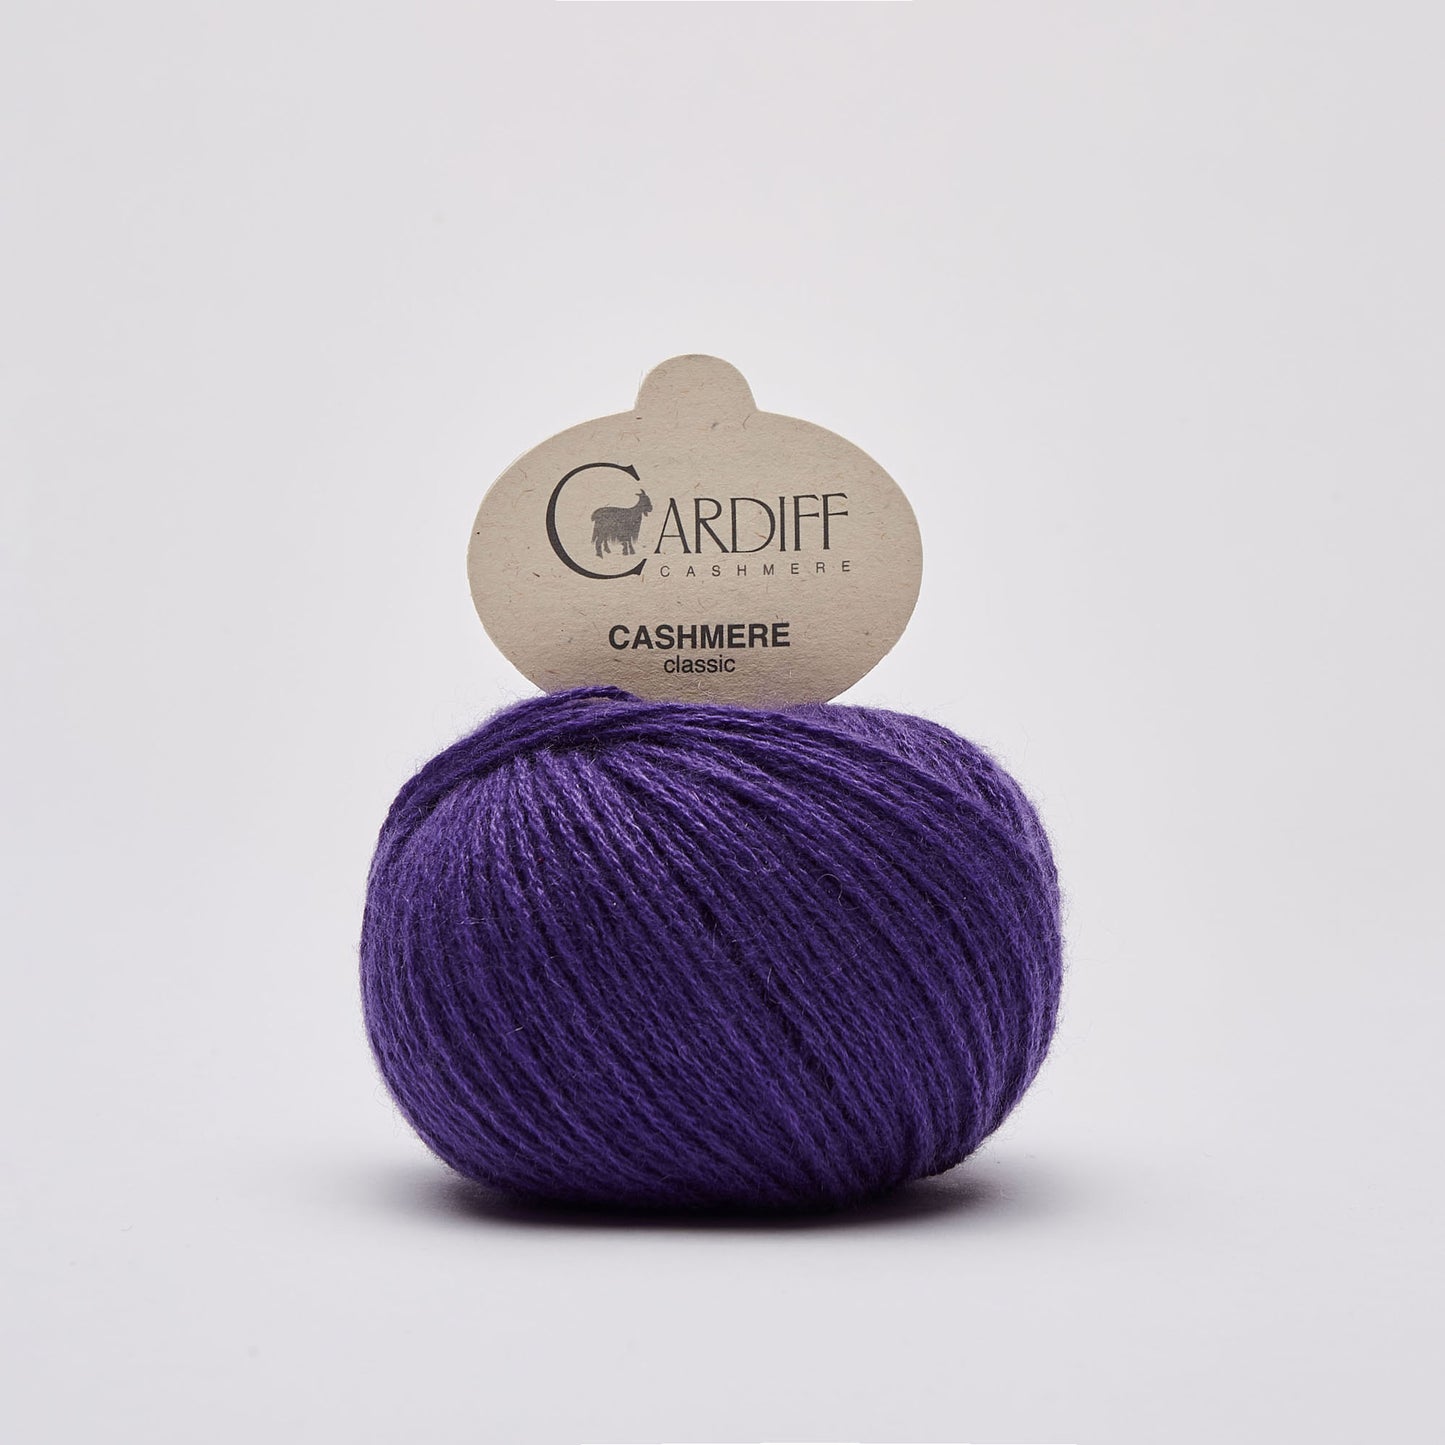 Cardiff CLASSIC gentle yarn, 620, POISON, comp: 100% Cashmere